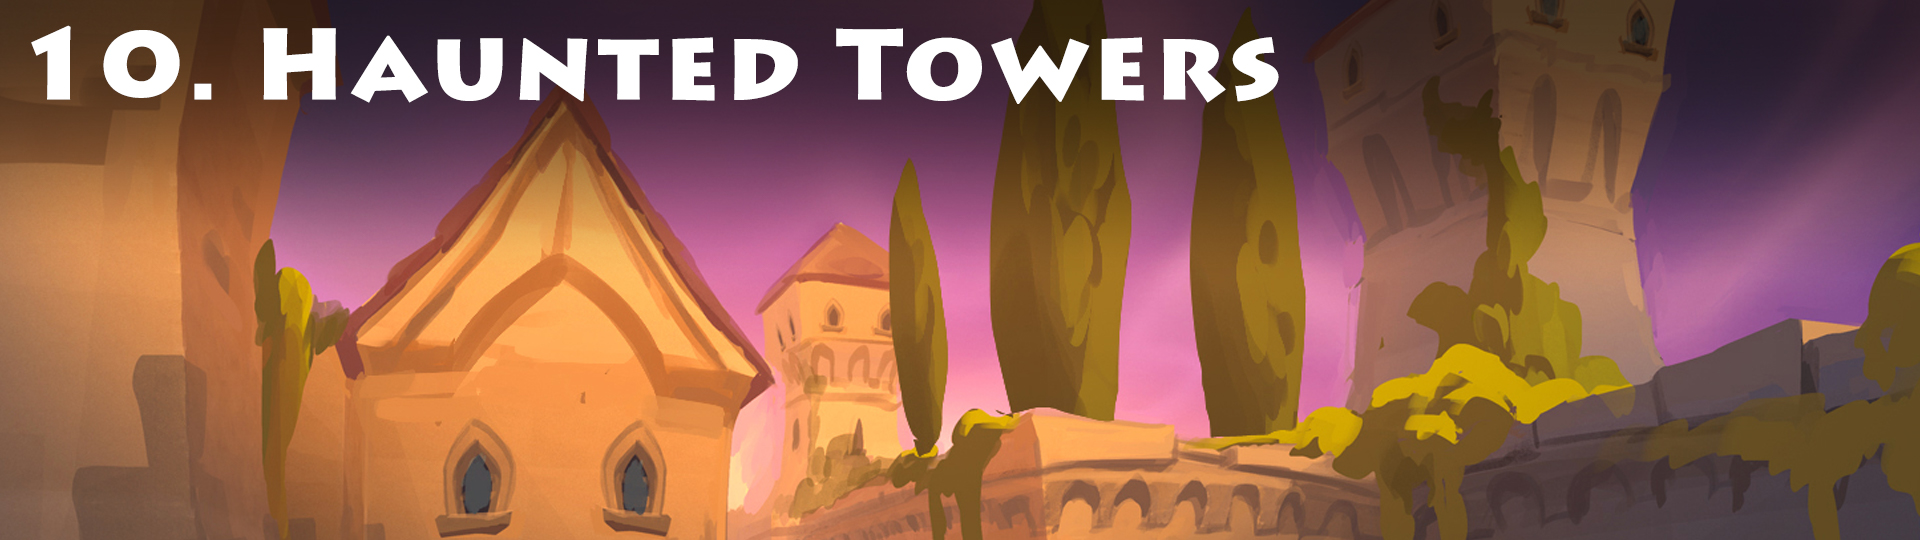 10. Haunted Towers